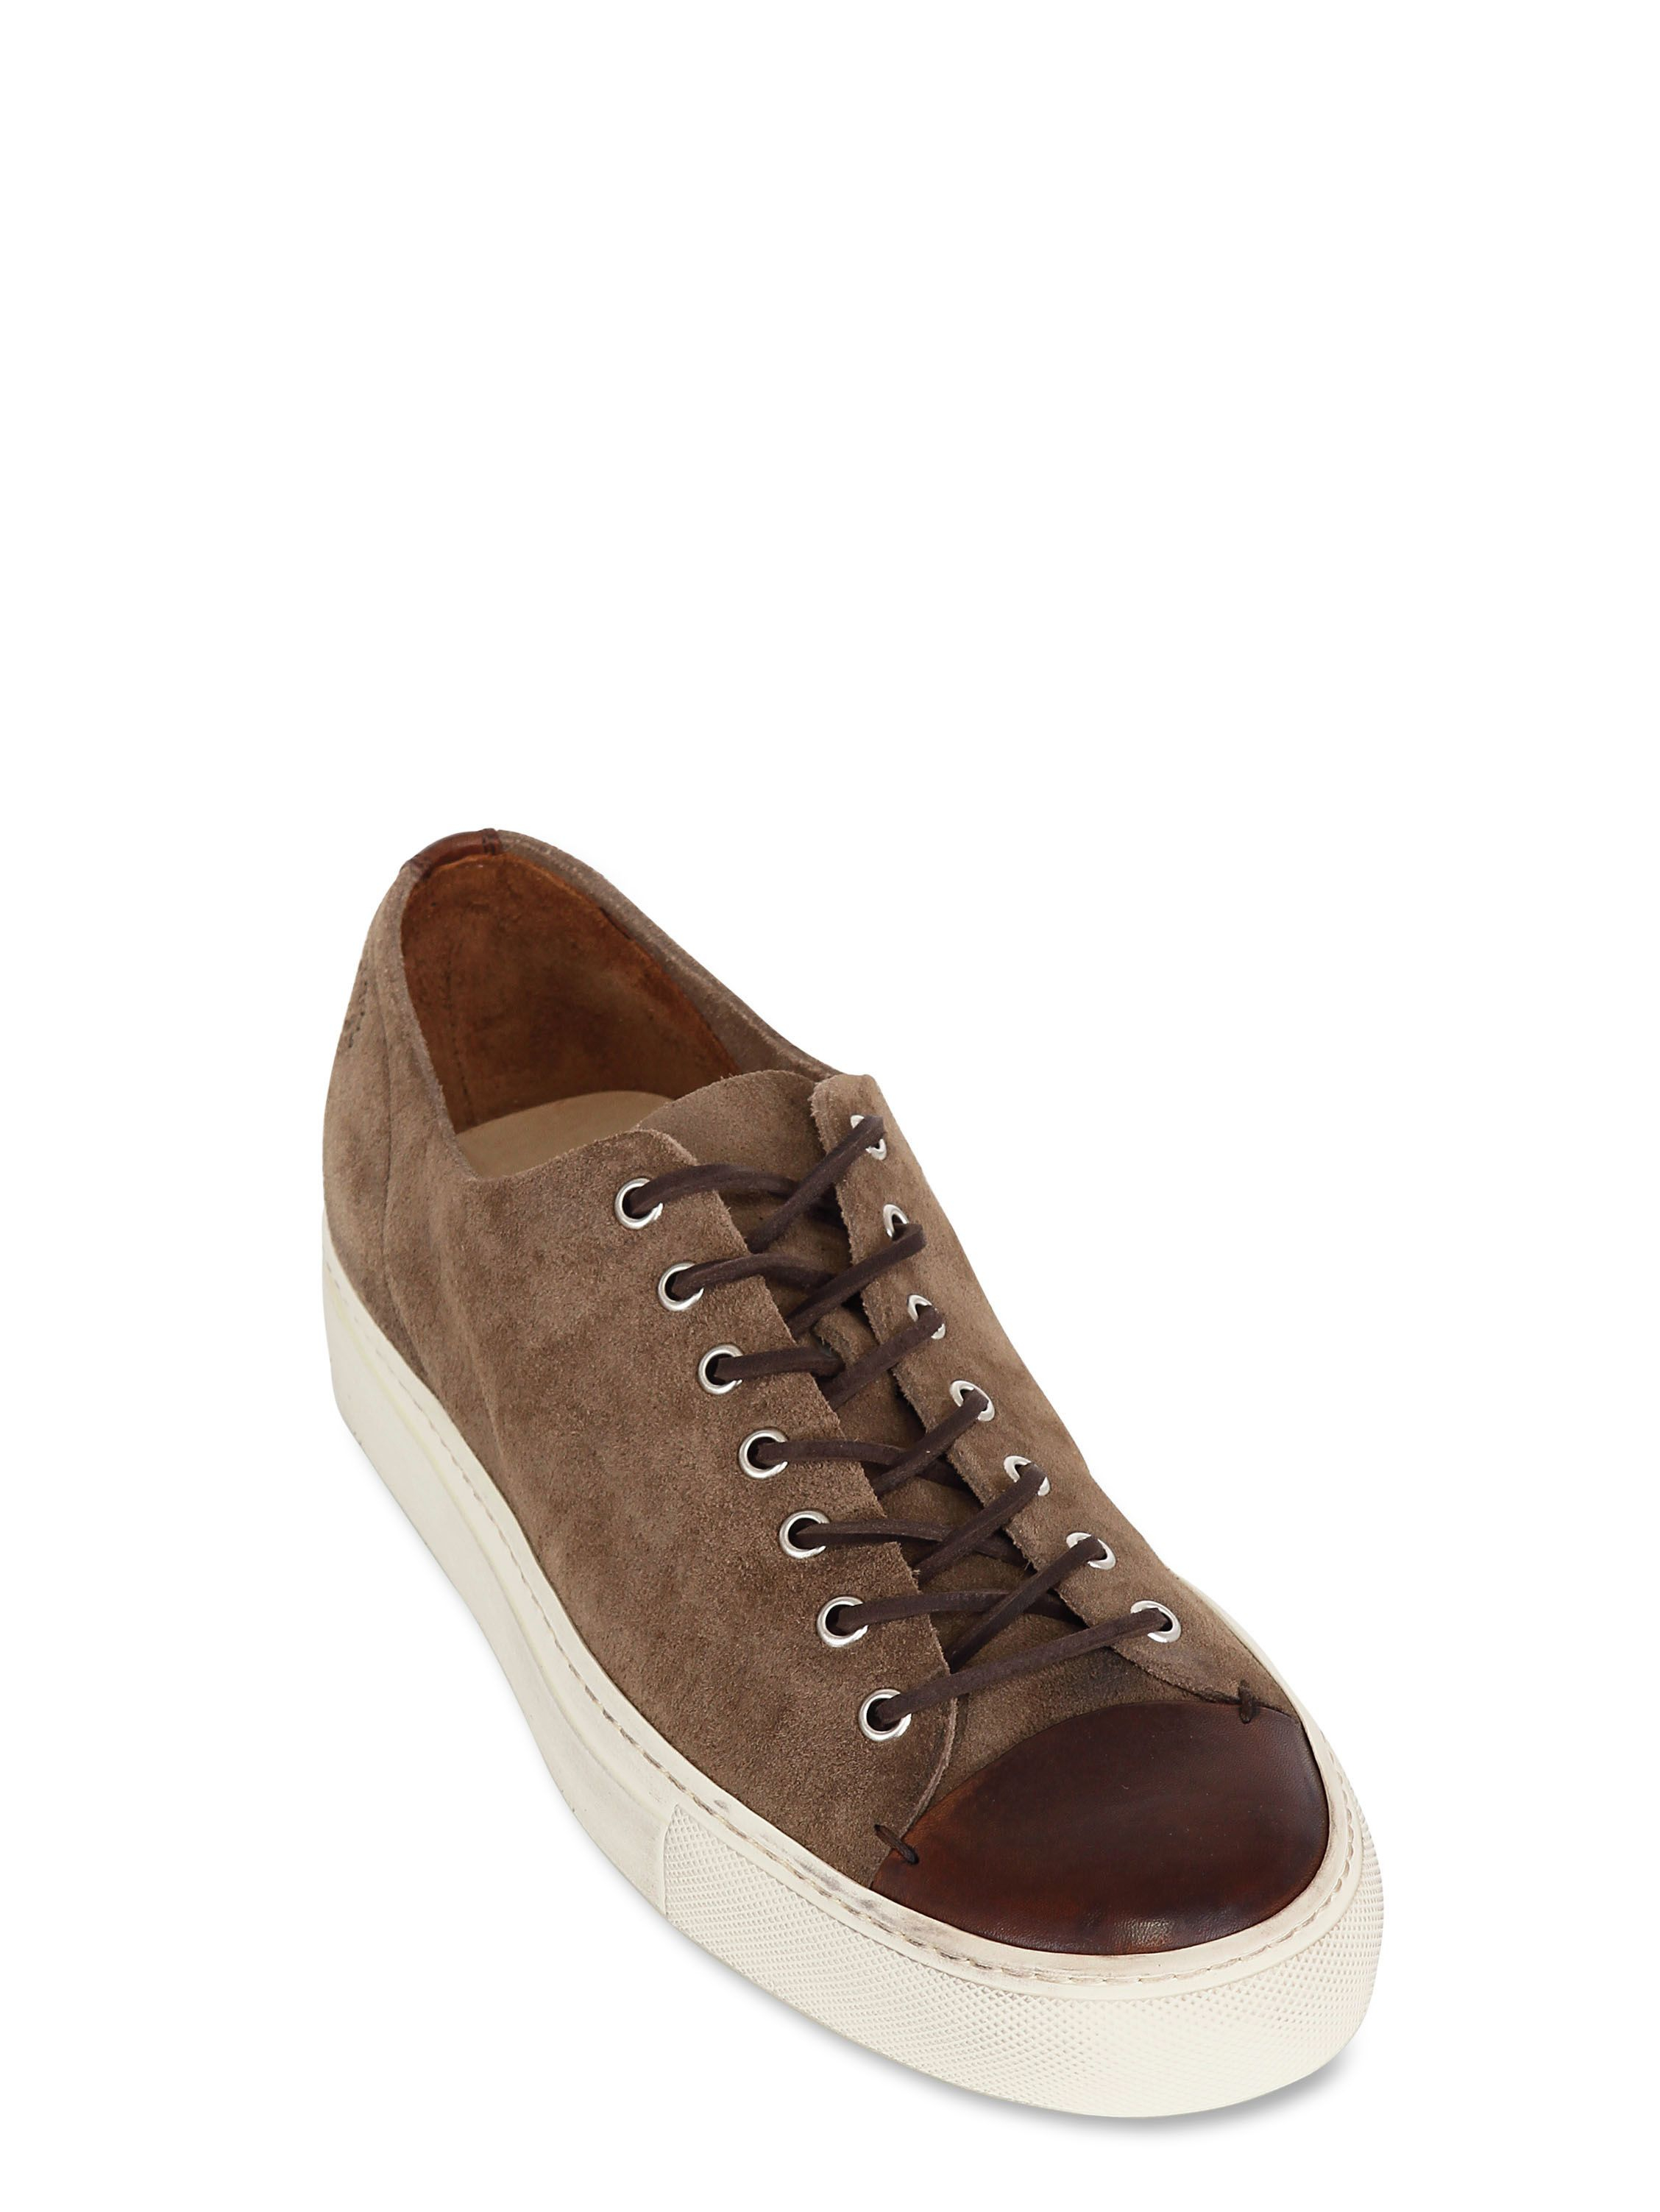 Lyst - Buttero Suede and Leather Low Sneakers in Brown for Men